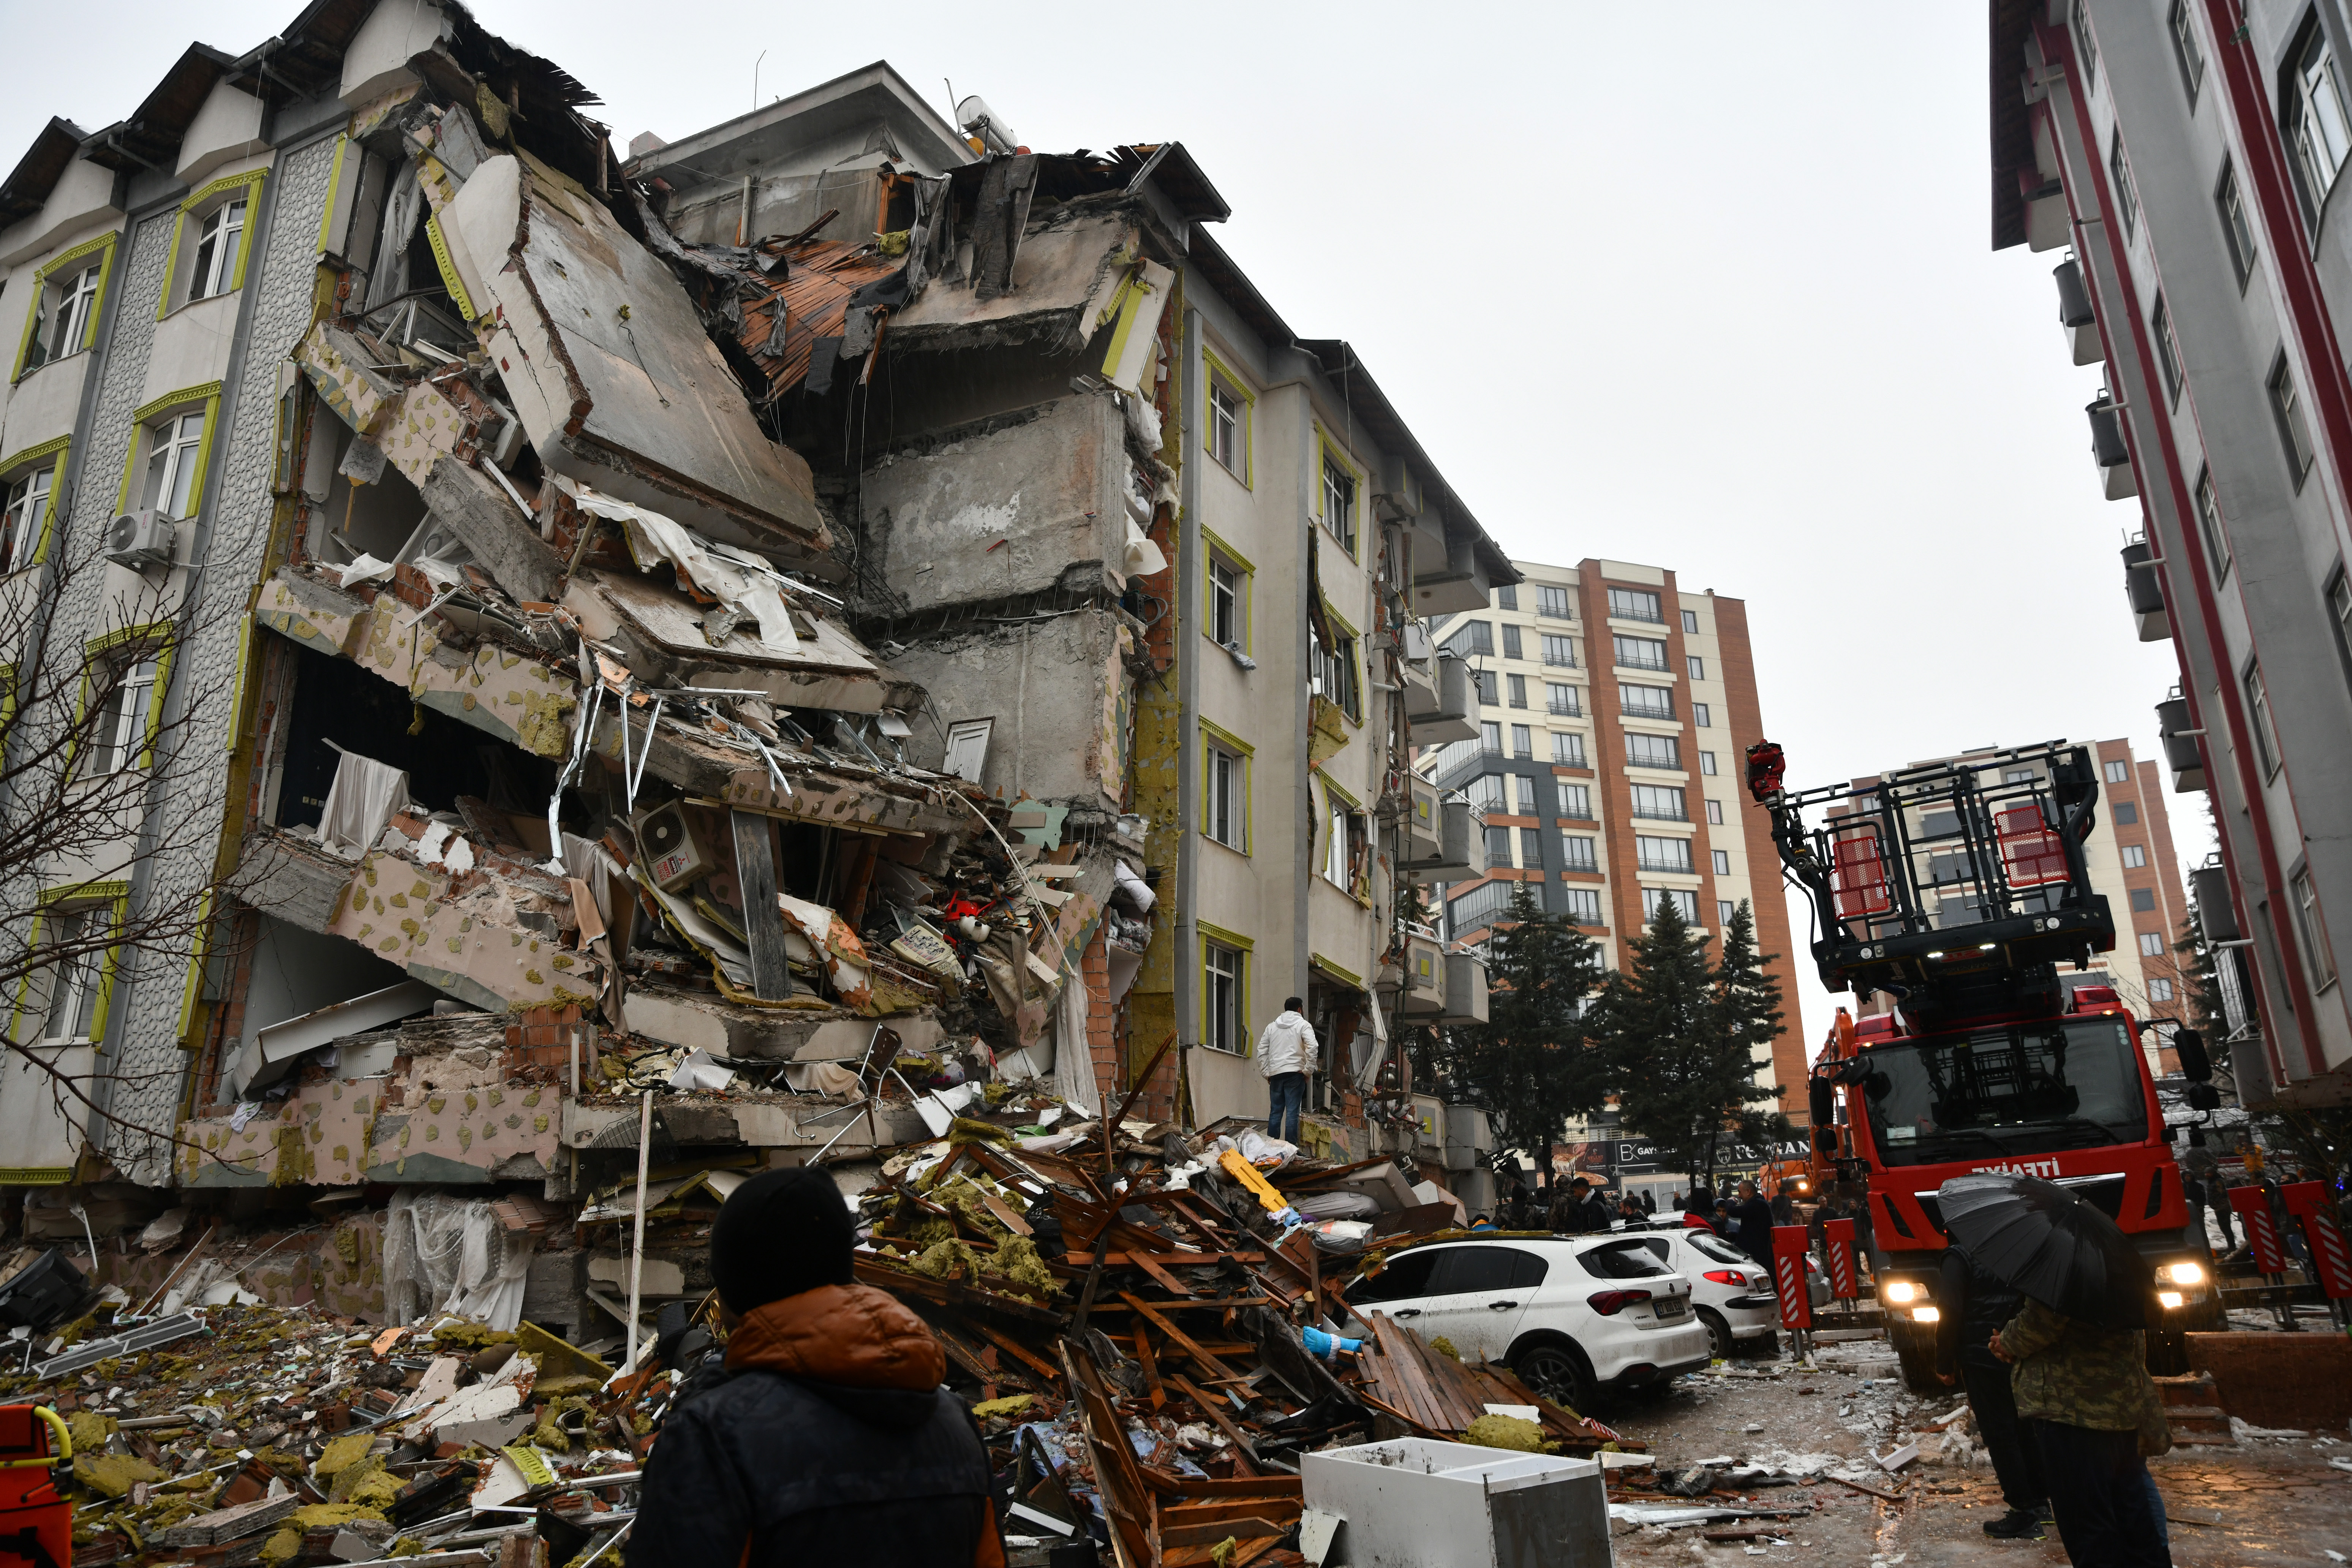 A view of debris as search and rescue works continue in Kahramanmaras,Turkey, on February 6.